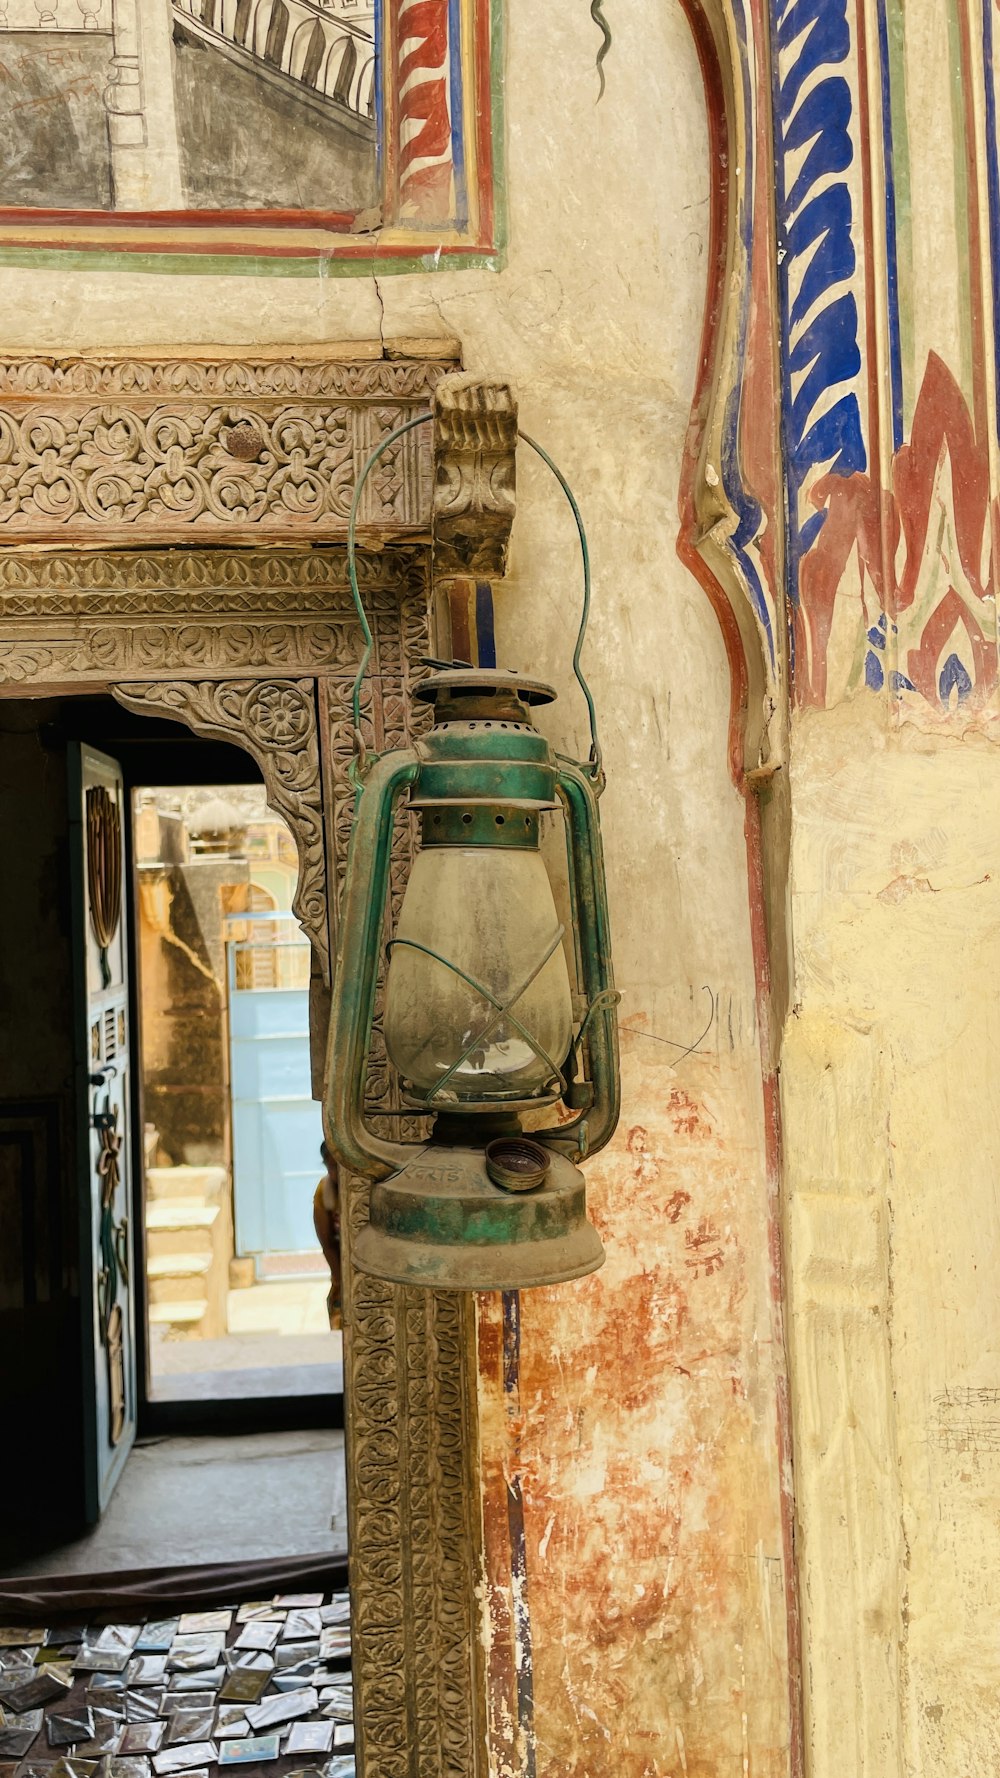 a lantern hanging from the side of a building